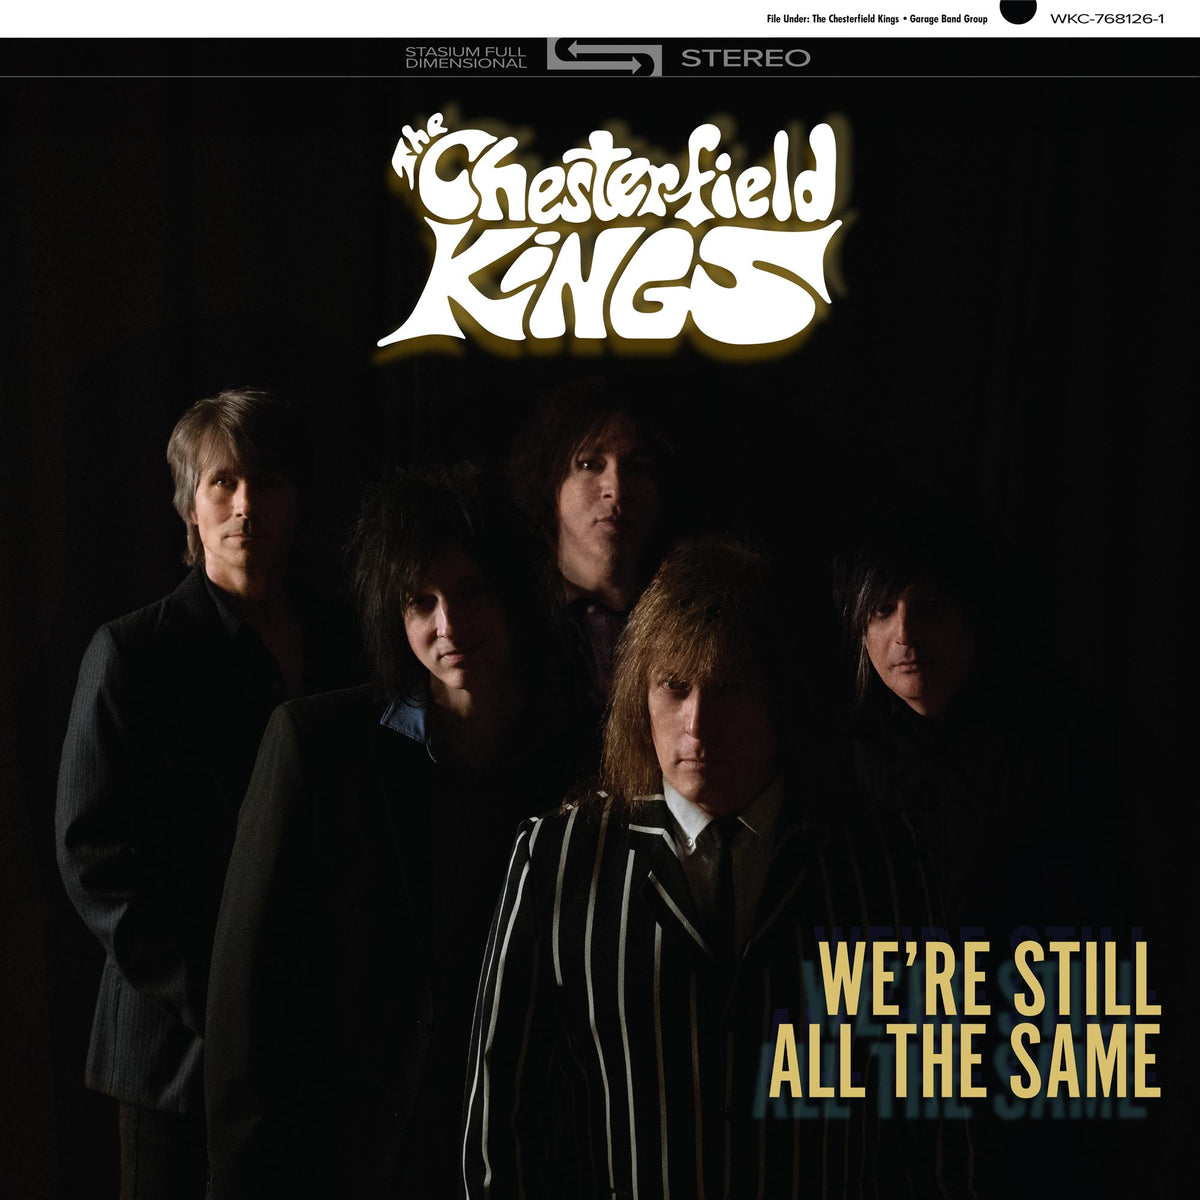 The Chesterfield Kings - We're Still All The Same - WKC7834422